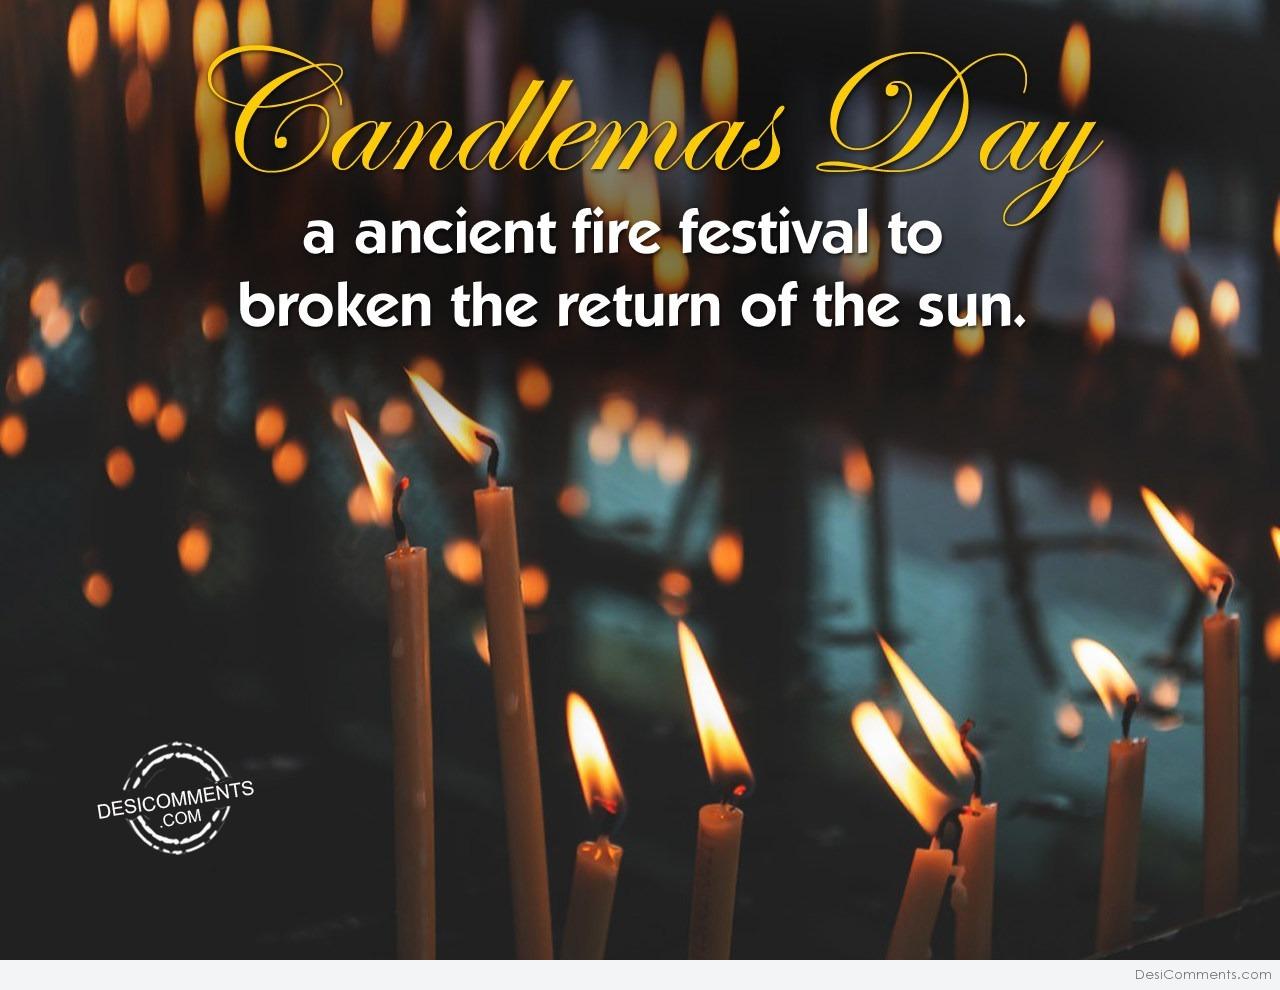 10+ Candlemas Day Images, Pictures, Photos | Desi Comments